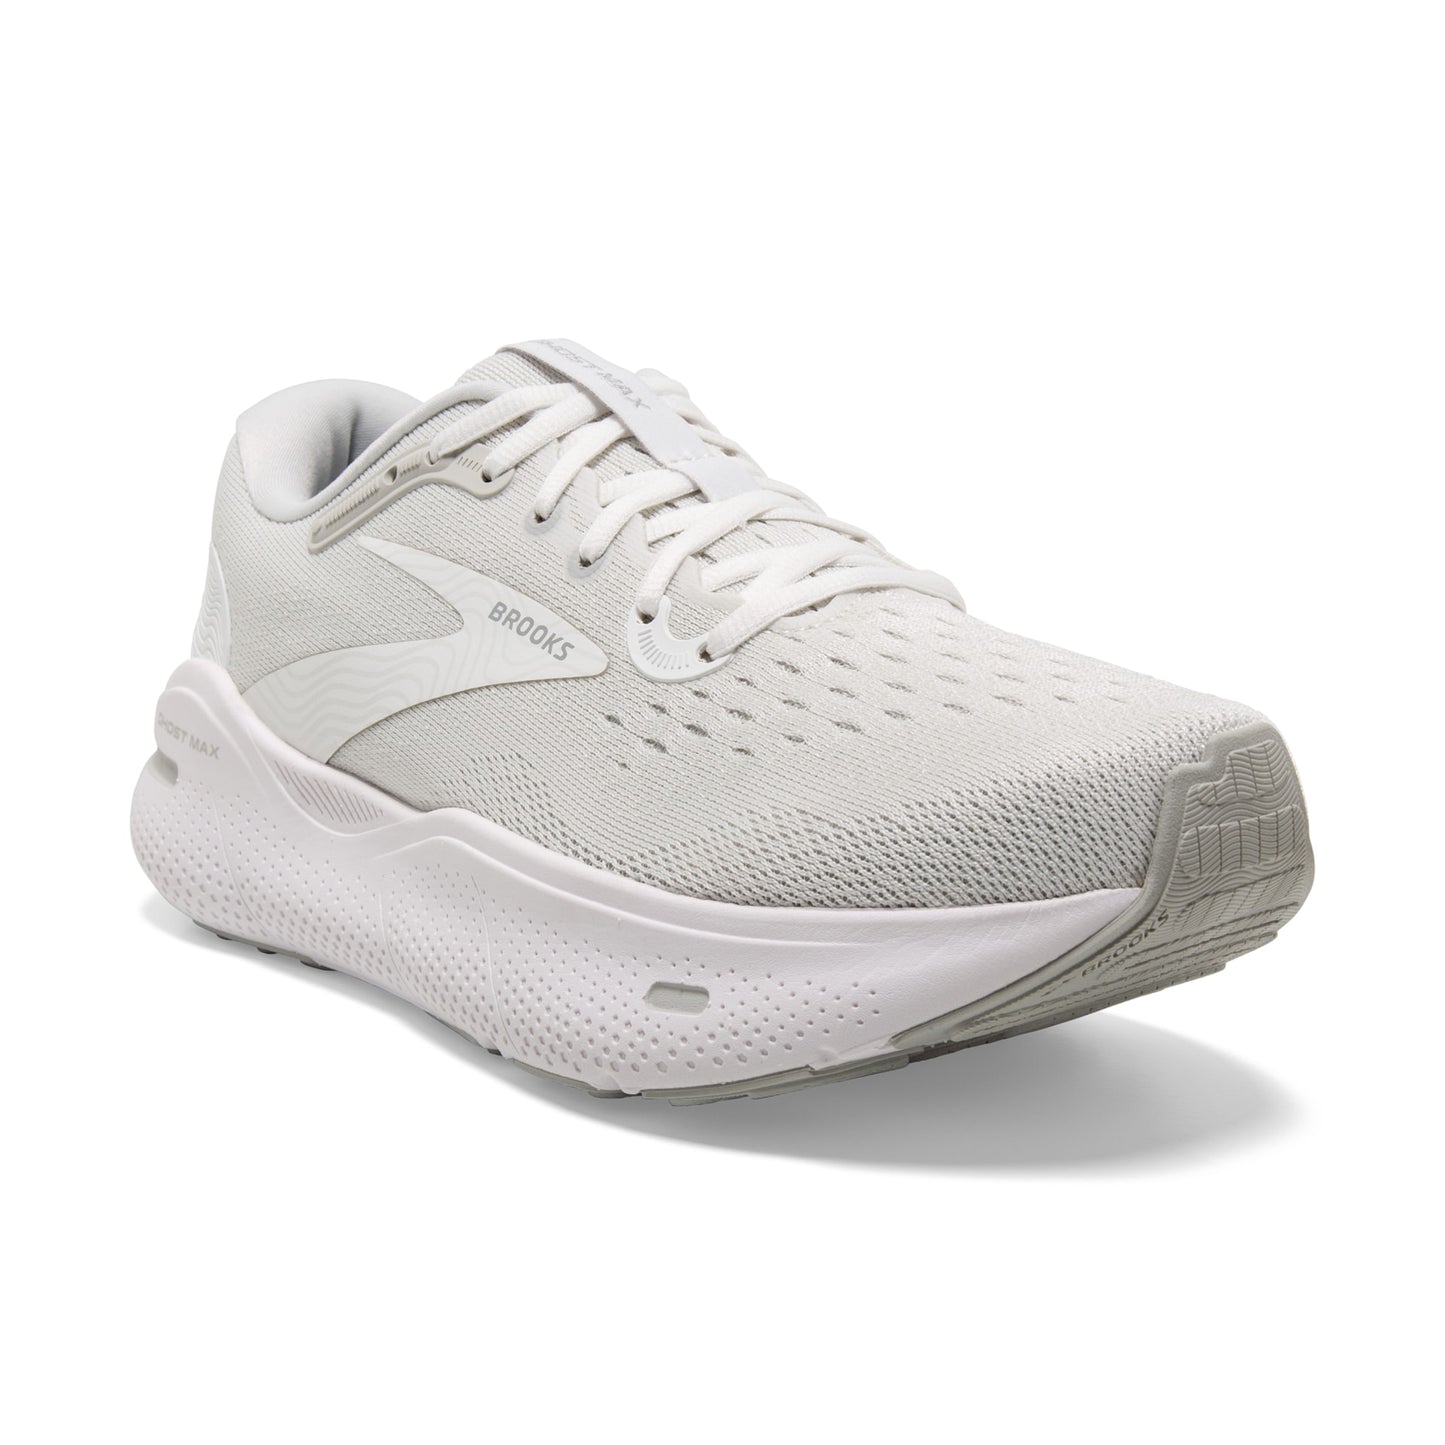 Ghost Max hommes 124 White/Oyster/Metallic Silver